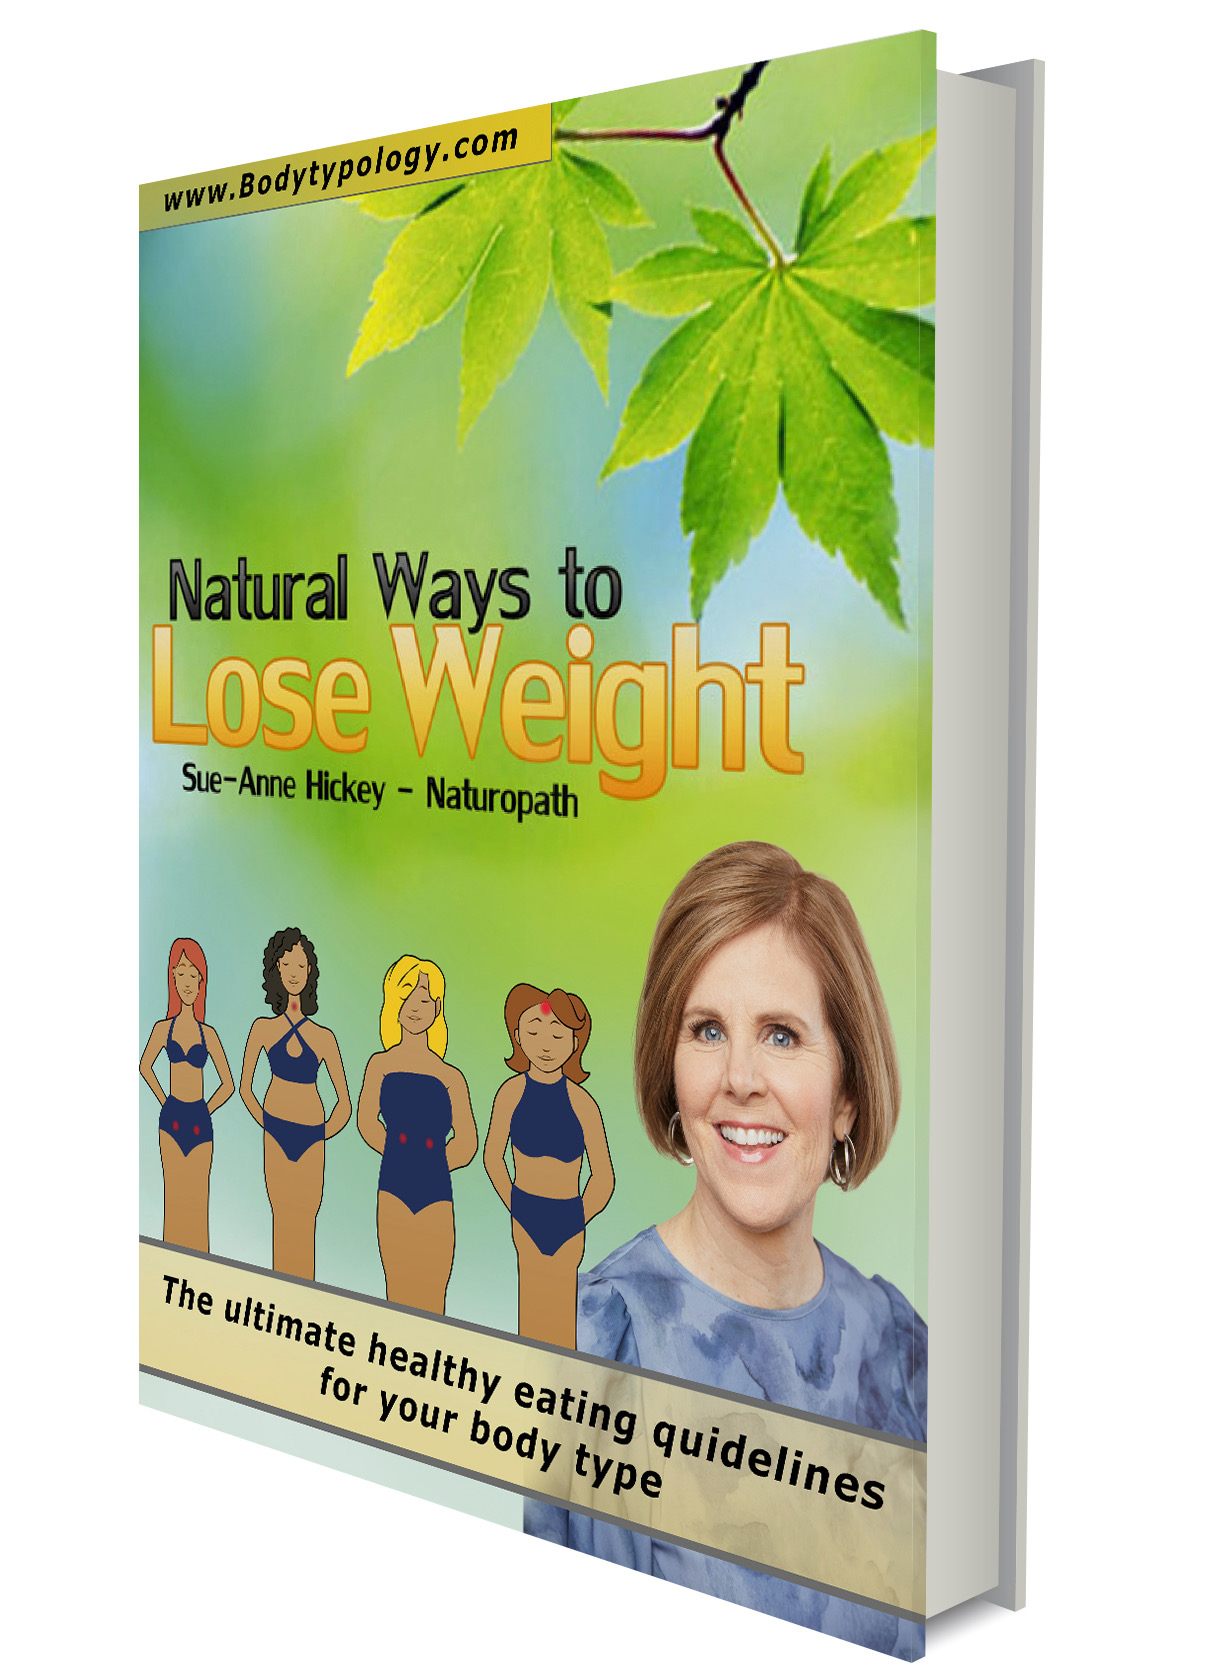 Natural-Ways-to-Lose-Weigh-Ebook-Thank-You